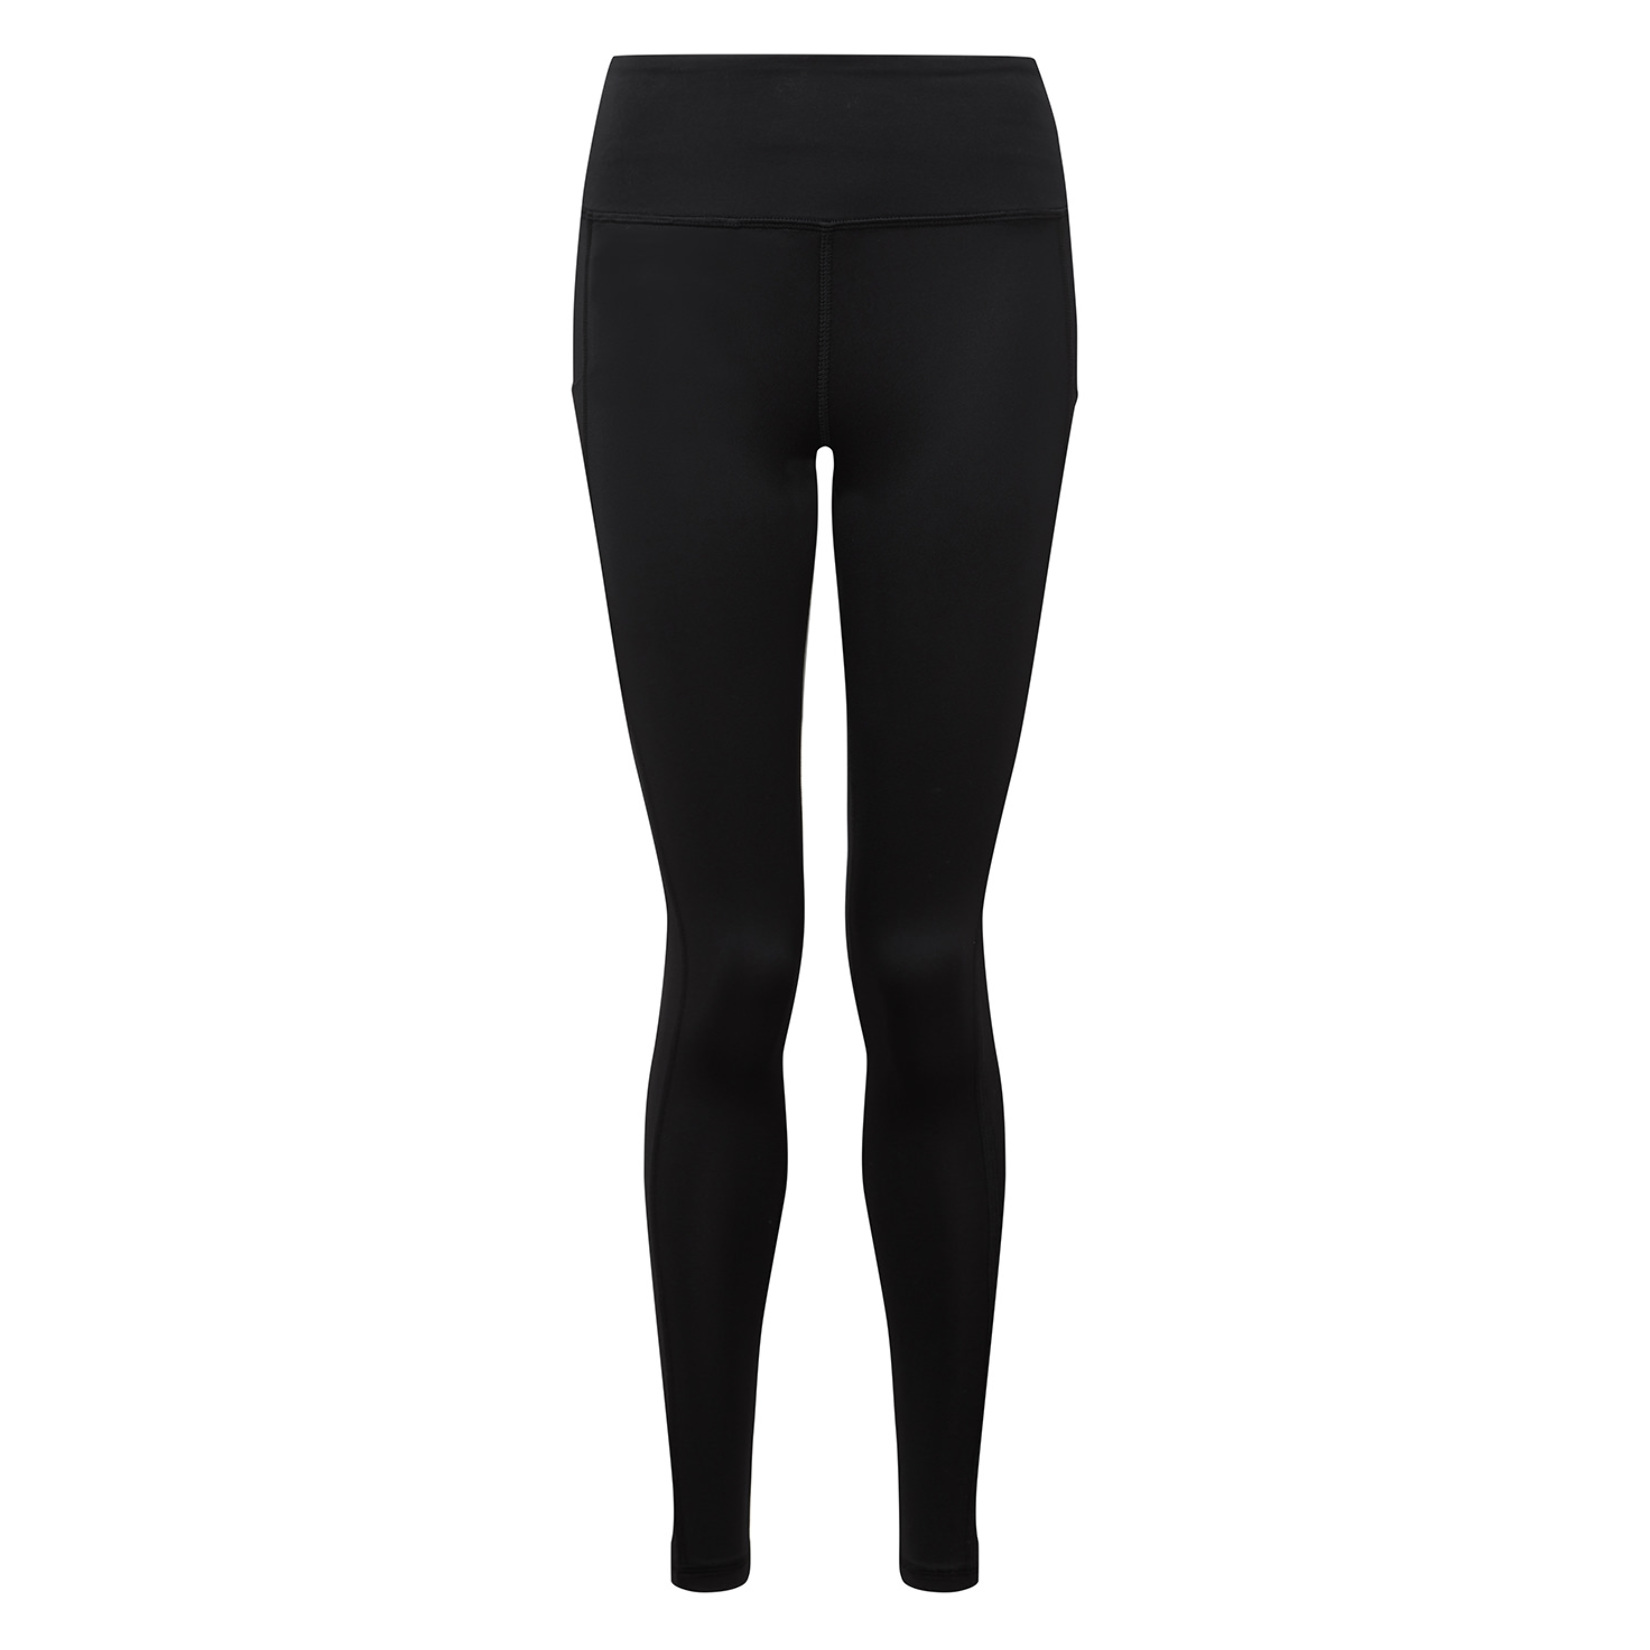 Womens Performance leggings with pockets